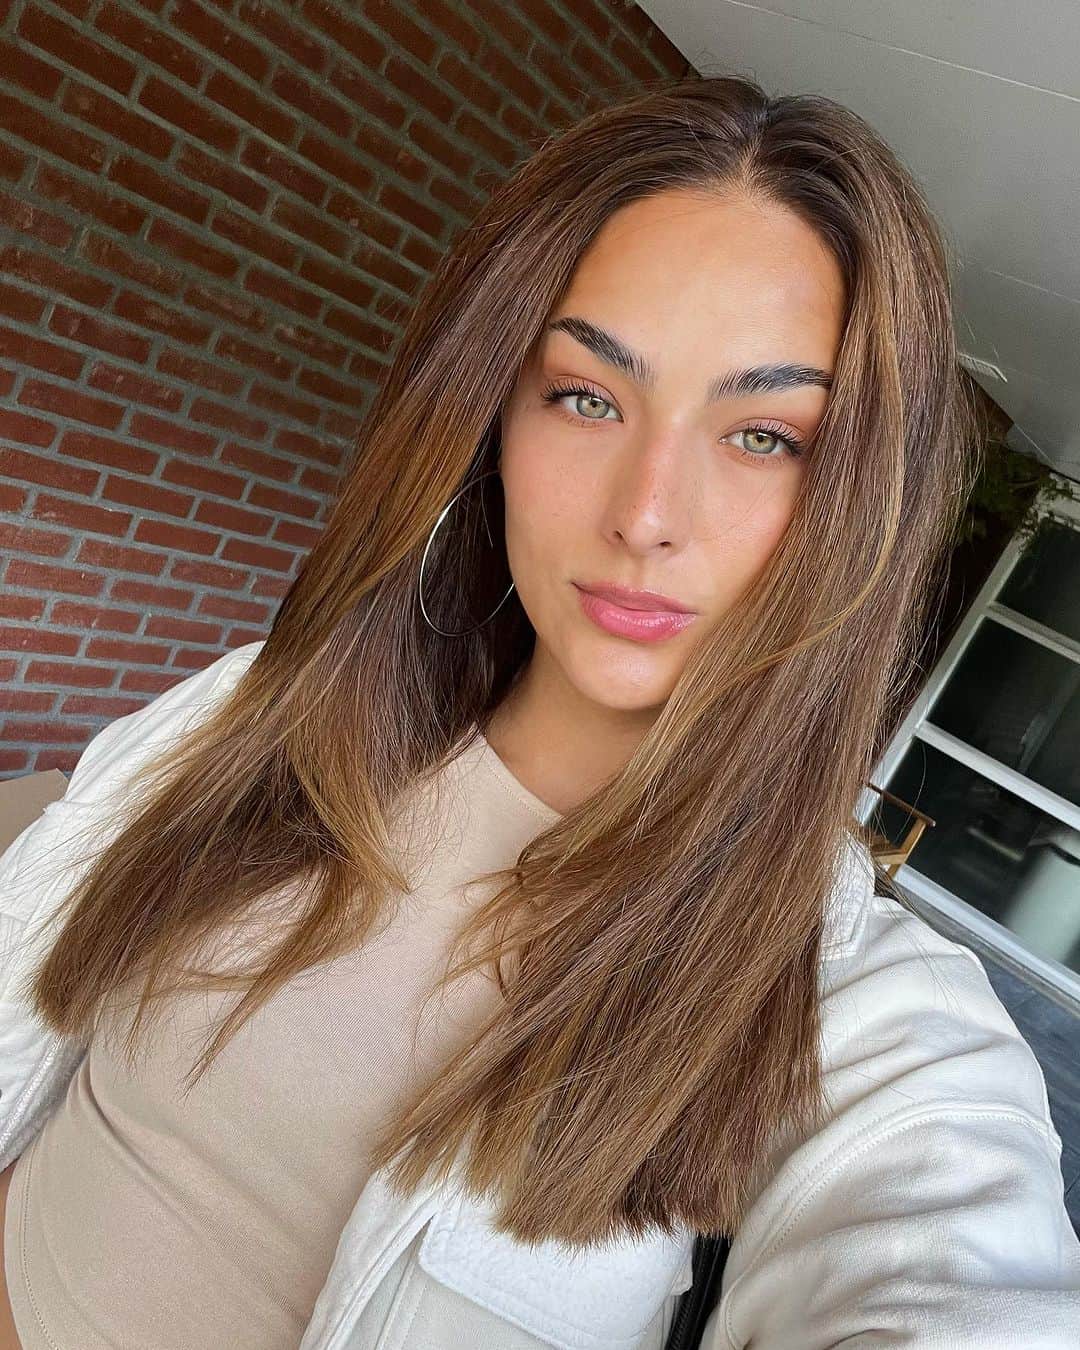 Dutchのインスタグラム：「the weekly/weekdump😍🫧🫶🏼🍵👇🏽 - 1️⃣ my hair is starting to grow thick and Mexican again🤌🏽🤣 why I’m saying that is bc my hair has been taking a toll because of medication around my surgery and highlights gone wrong. So super happy with the progress! 2️⃣ just trying out a gluten free burger?wasn’t that bad tbh! been testing with gluten and I have massive reactions to it (see last pic) So testing which foods trigger my gut or not.  3️⃣ made a cutesy yt video with @deniseanna & bubb @jeremy.mettendaf soon online on hee channel. 4️⃣ testing new makeup skills an glowy products- whatchu think? 5️⃣ first time @ starbucks after Japan. It’s not hitting the same but it was good nonetheless. 6️⃣ J inspired me to make this, since I can’t eat normal wheat wraps no more, we’re eating corn tortillas😍 tbh don’t even know why I didn’t do this sooner. Ate them in Mexico everyday SO good. 7️⃣ obviously bubble tea is a weekly thing🫧 matcha soy with tapioca pearls it was! 8️⃣ the bestest pancakes evaaaahhh. 9️⃣ just me staring into oblivion. A peaceful moment🤭. 🔟 me and my gluten belly🙃 so painful and this happened after eating only one wheat tortilla & a digestive cookie. More tests coming soon! Hopefully I’ll get a disclosure on what I’m allergic to.  - Have a good start of the week!!🩵」